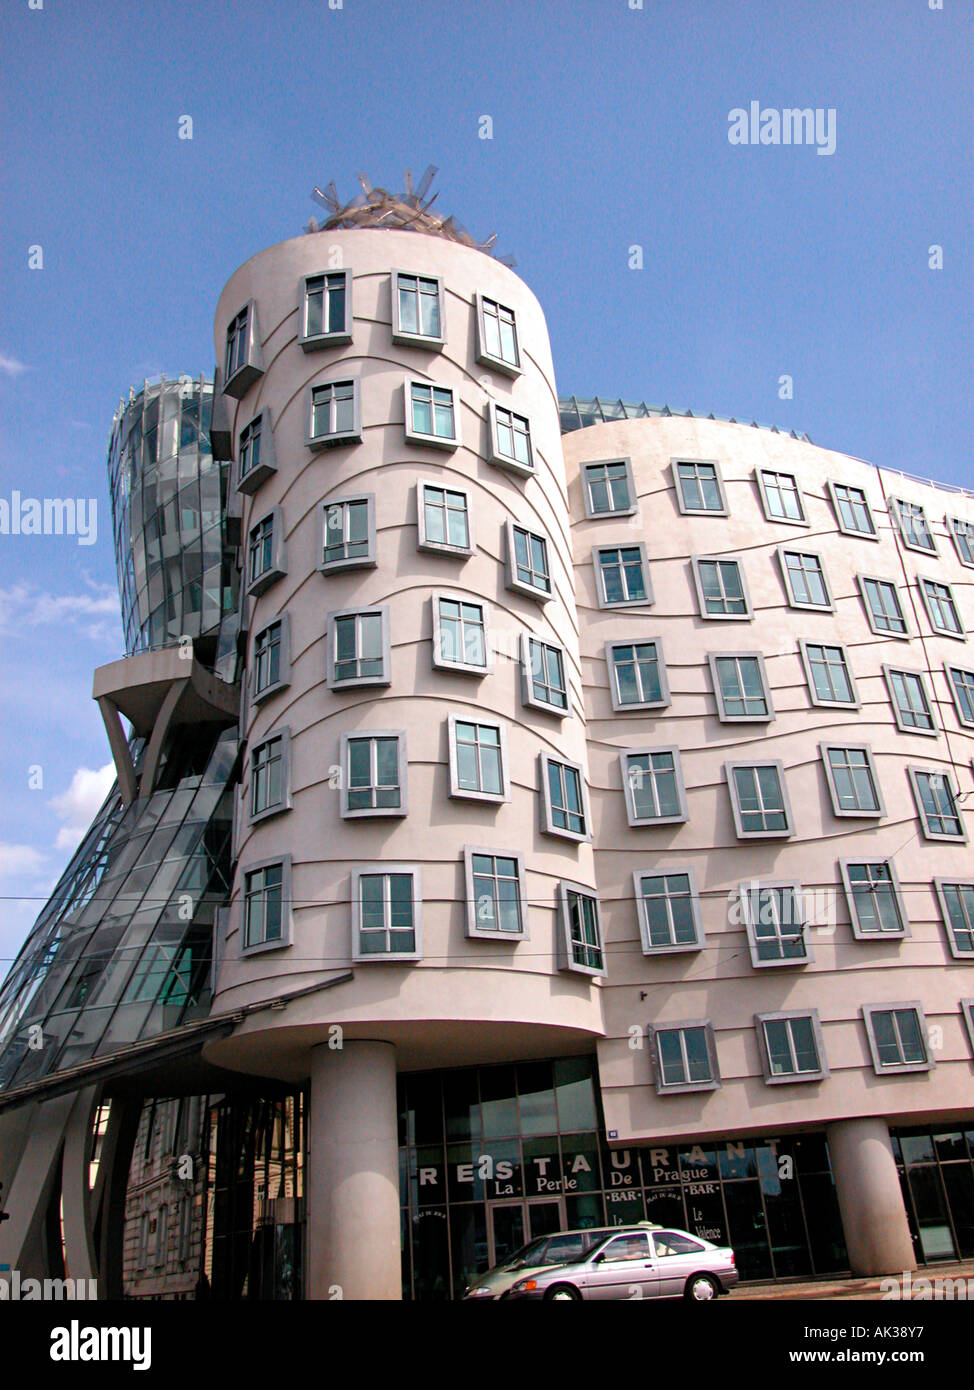 Frank Gehry's Rasin Building, known as Fred and Ginger (after Astair and Rogers) looking as though they are dancing together. Prague. Czech Rep. Stock Photo